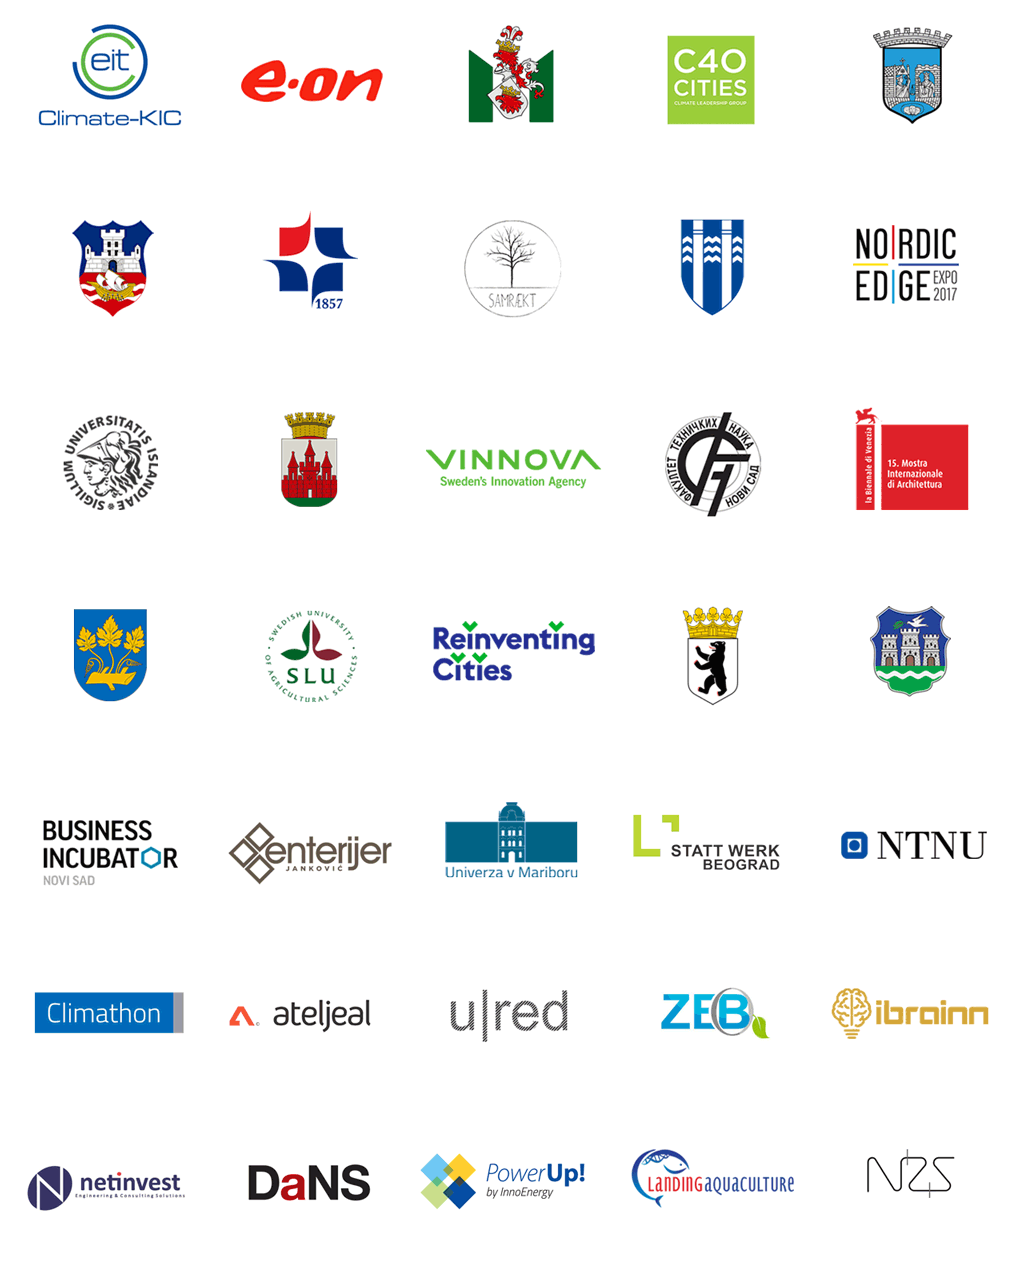 Our clients and partners